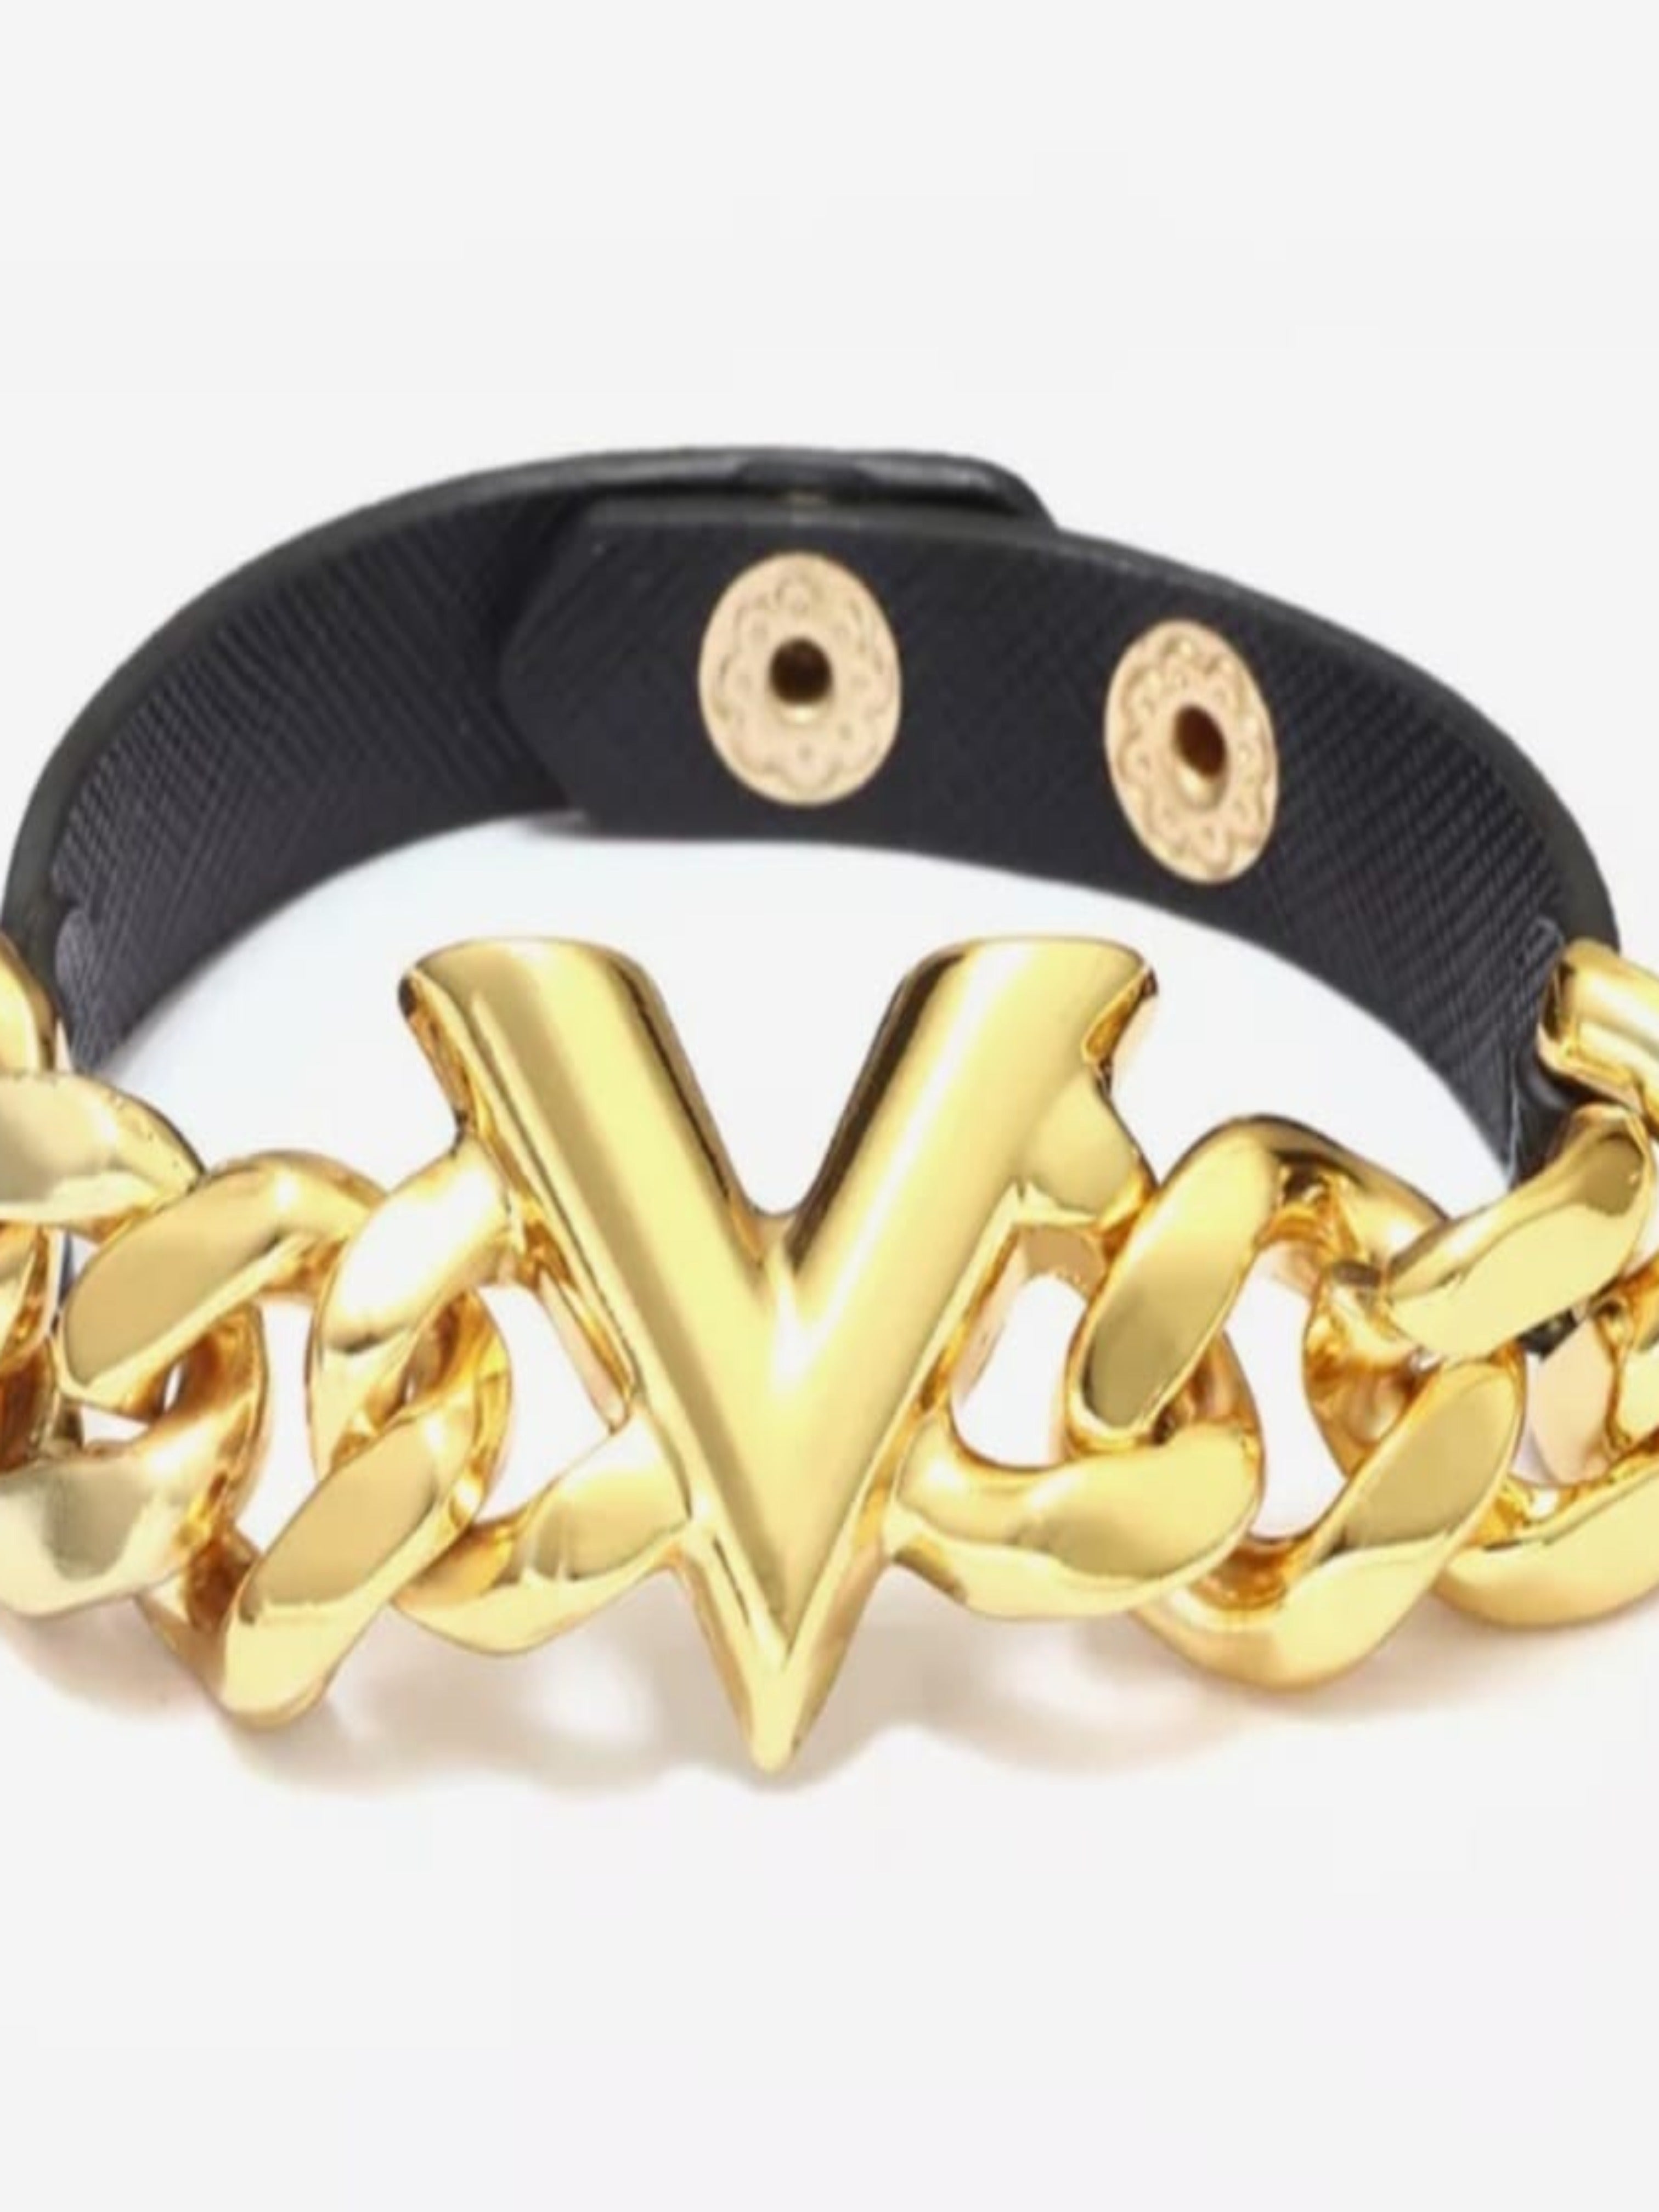 Gold Plated Chunky Chain Leather Bracelet with V Detail in Black